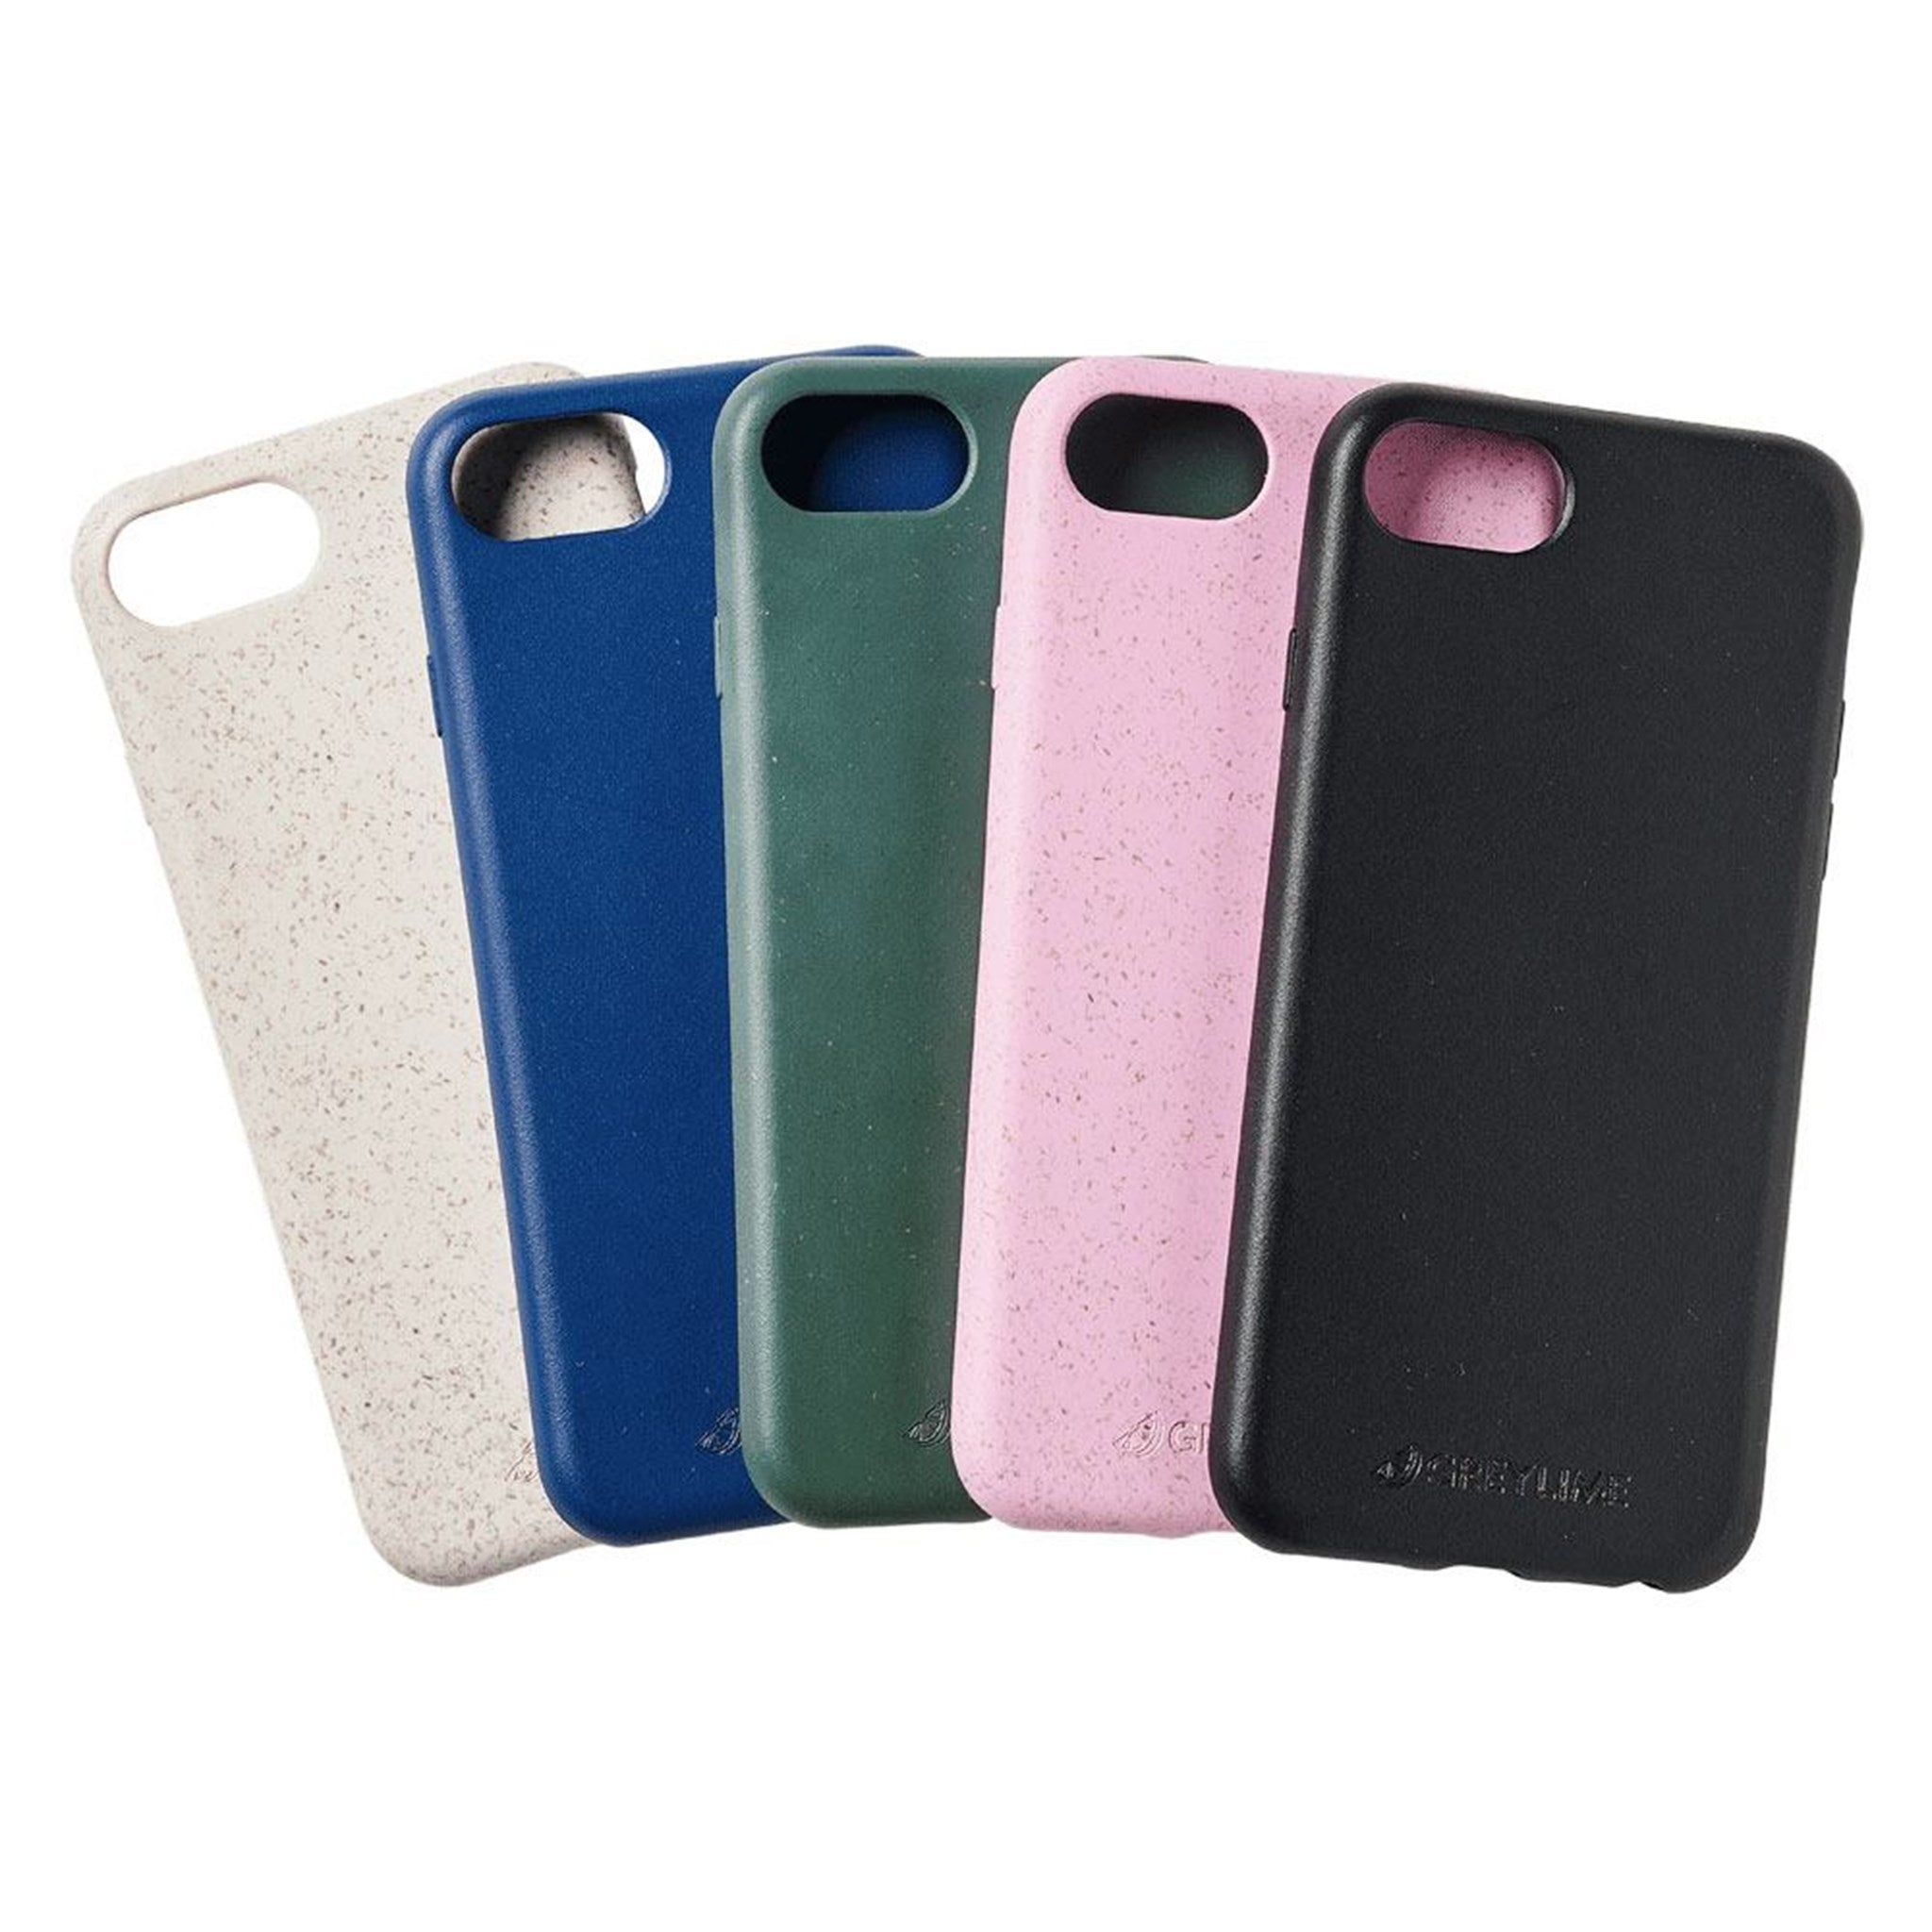 GreyLime-iPhone-6-7-8-Plus-biodegradable-cover-COIP678-gruppe-1.jpg